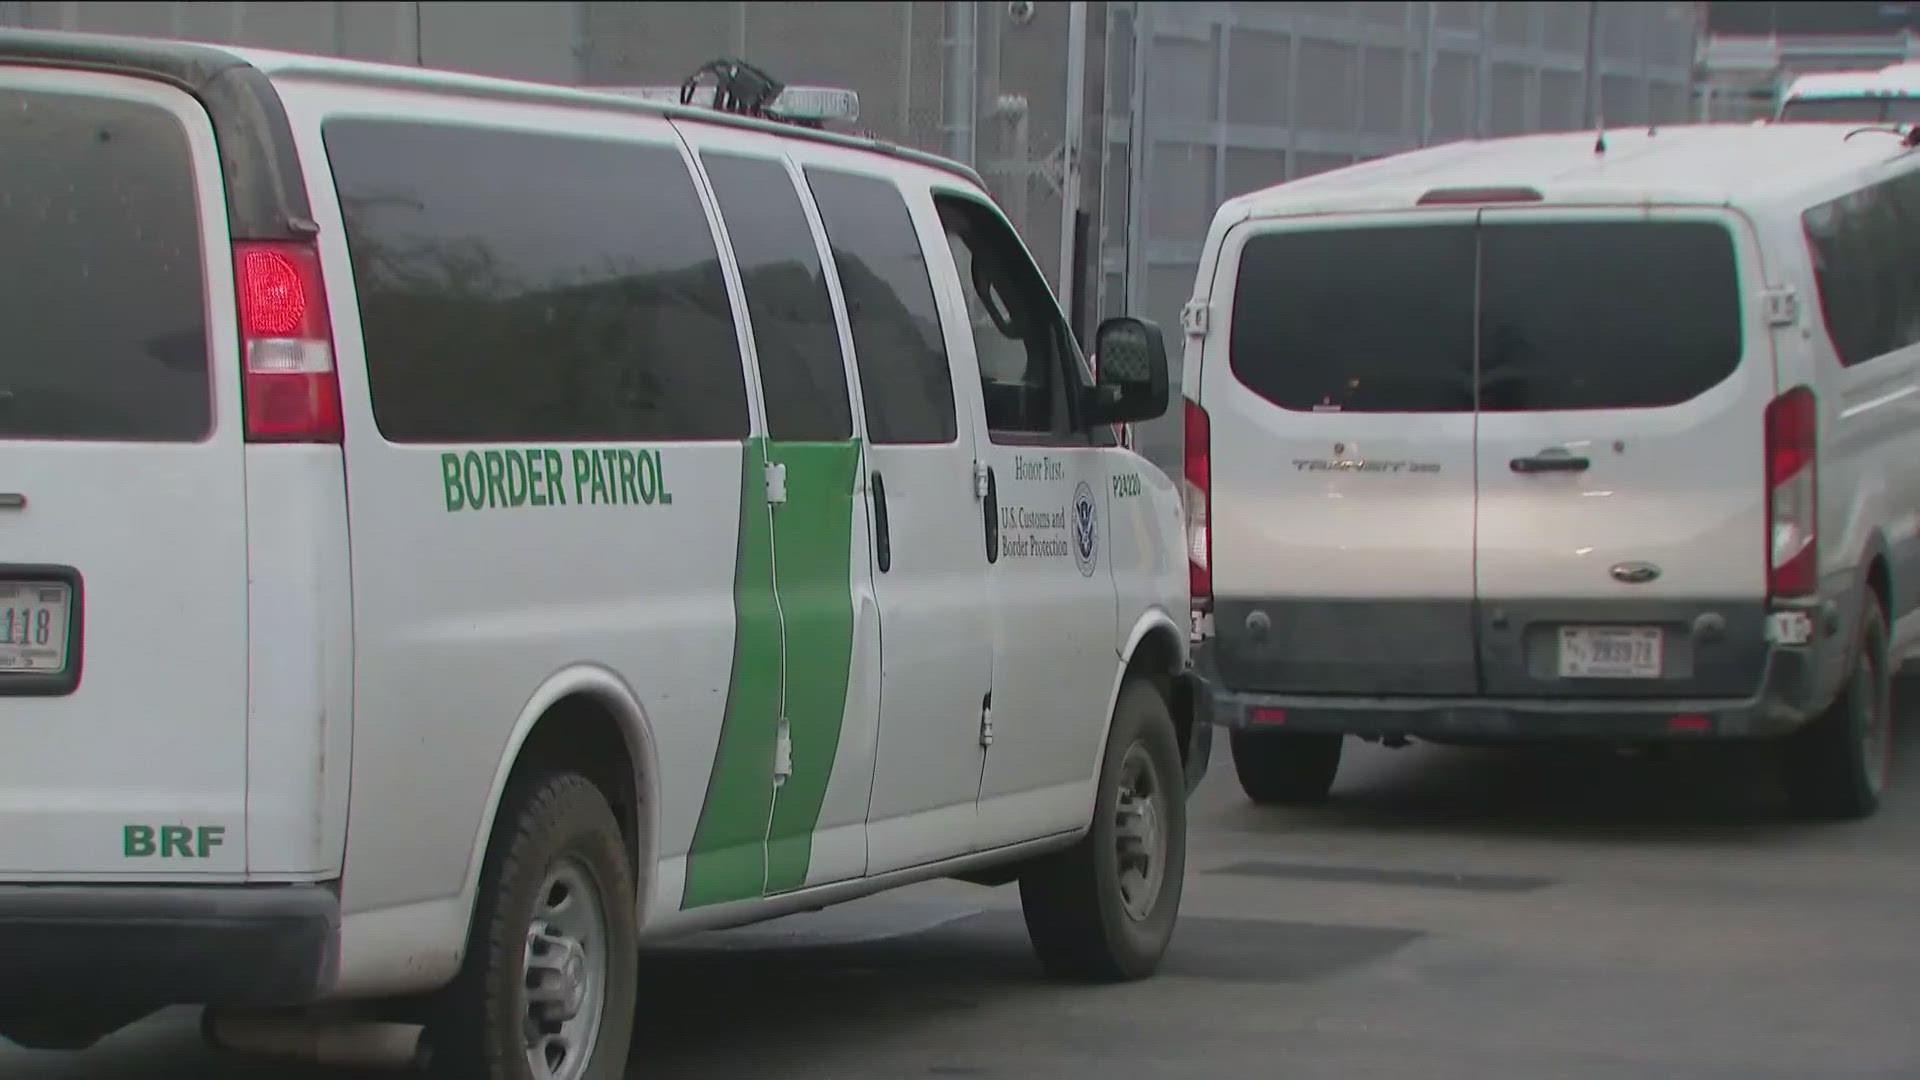 The temporary suspension at Ped West will allow CBP to assist the U.S. Border Patrol in processing noncitizens who have arrived between the ports of entry.